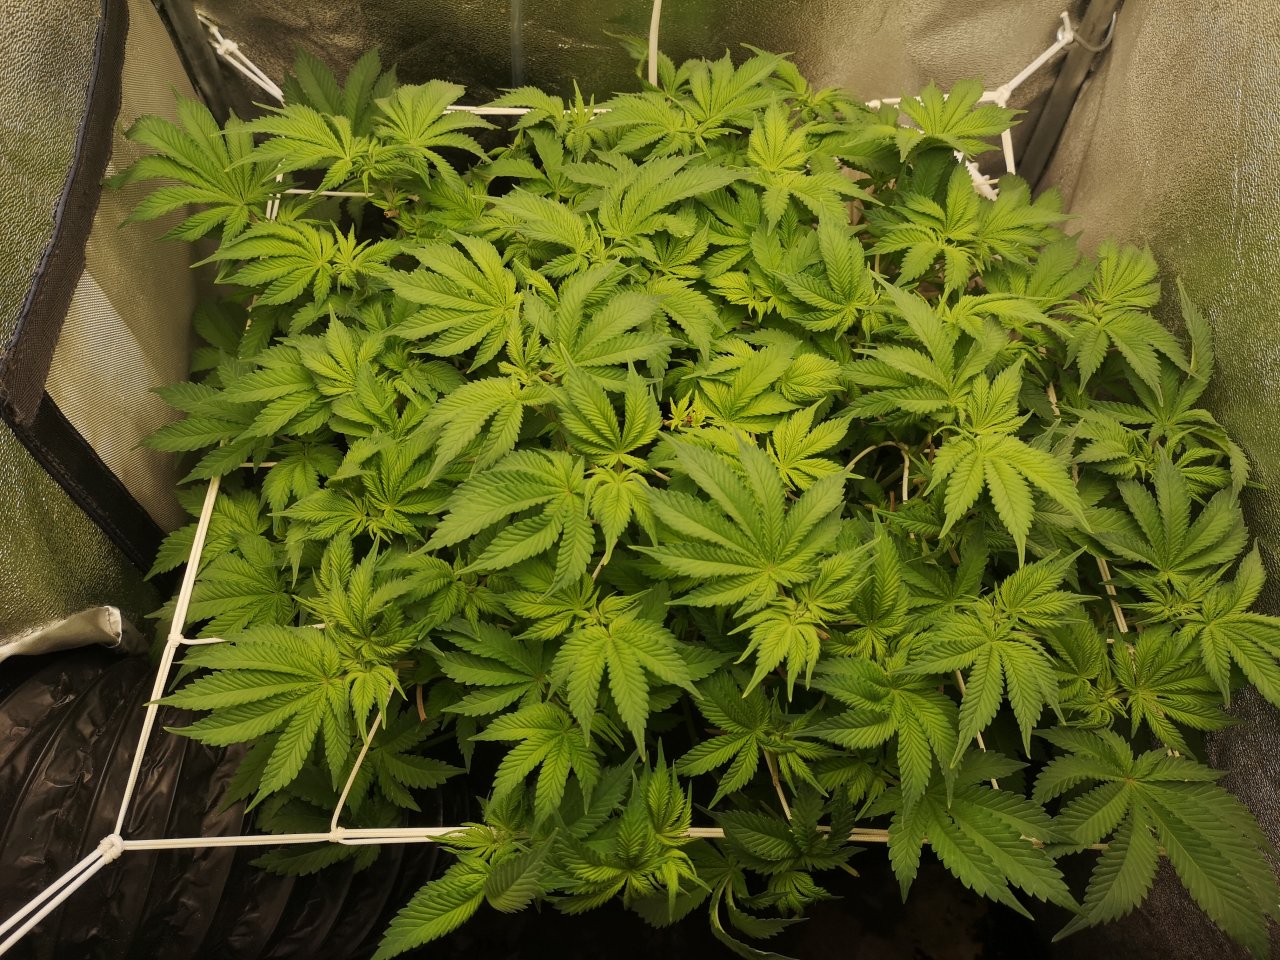 WiFi OG - w10d4 - not a lot done